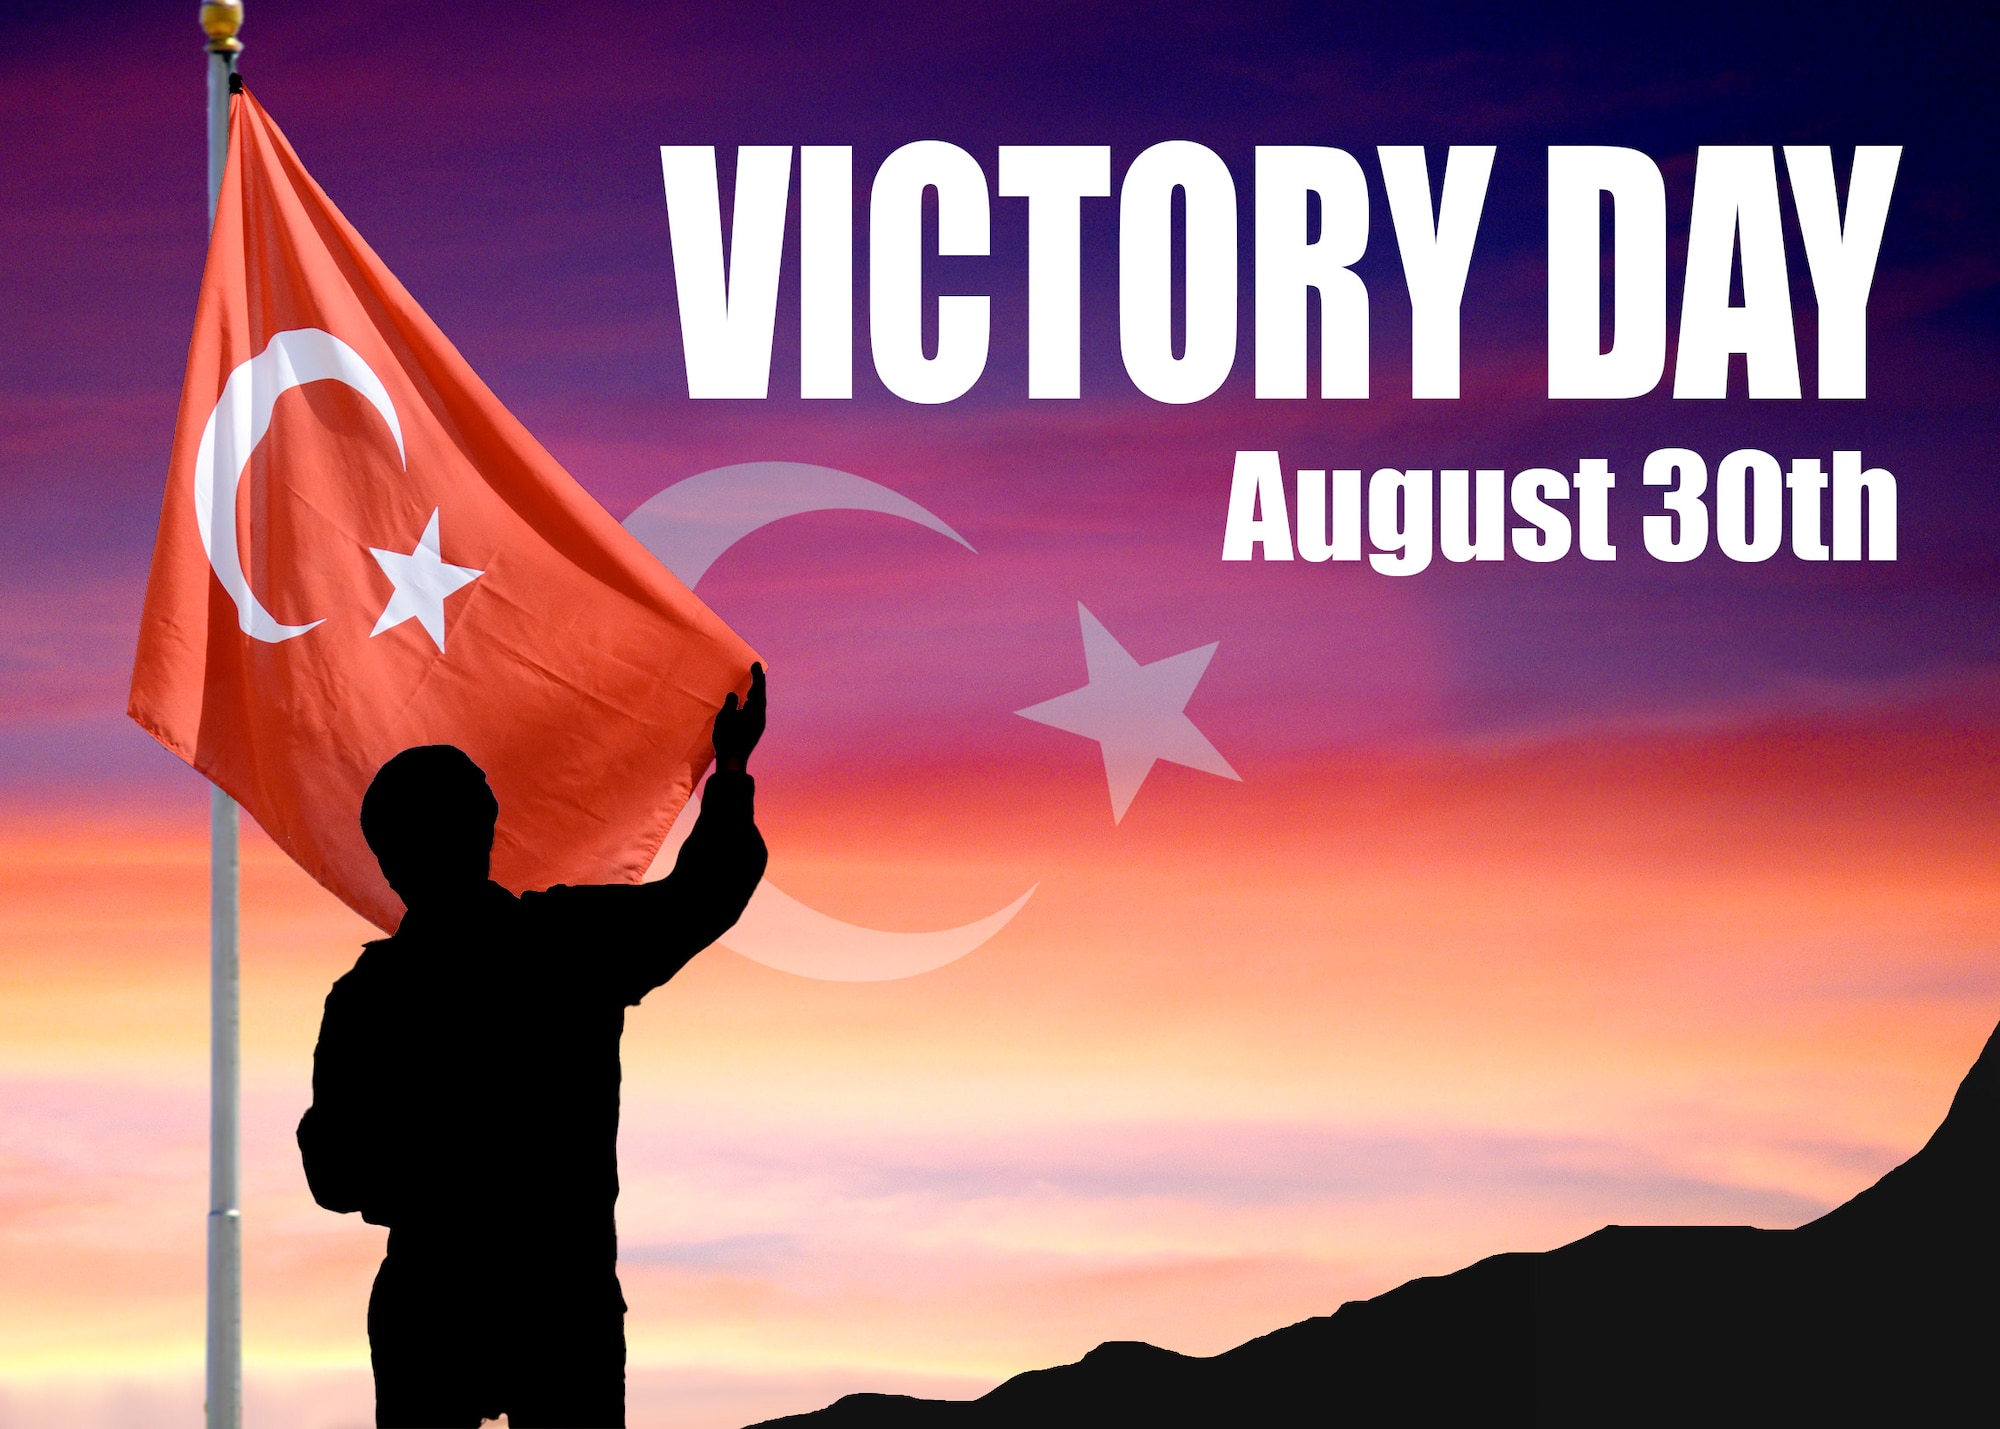 Victory Day is a Turkish national holiday that's celebrated on Aug. 30 each year. It's the day of the final victory between national Turkish forces over Greek invaders in 1922.
The Ottoman Empire, which was in power for almost 600 years, was facing defeat during World War I. After the war, Turkey was divided and occupied by British, French, Italian and Greek troops. (U.S. Air Force graphic by Senior Airman David D. McLoney)